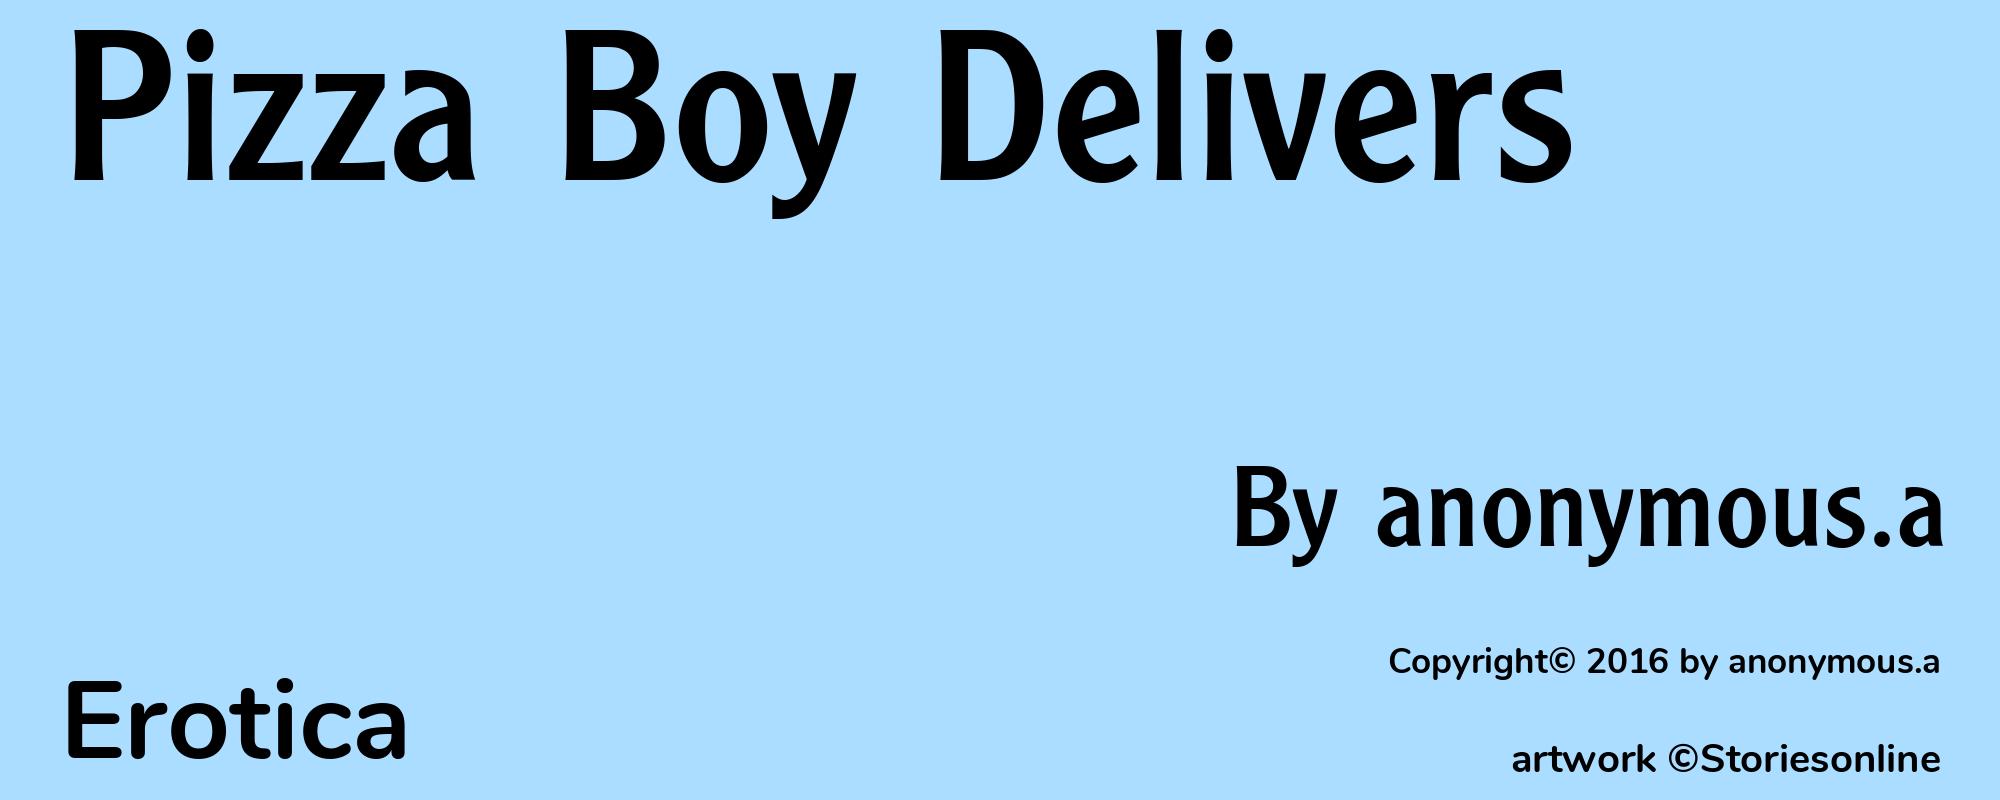 Pizza Boy Delivers - Cover